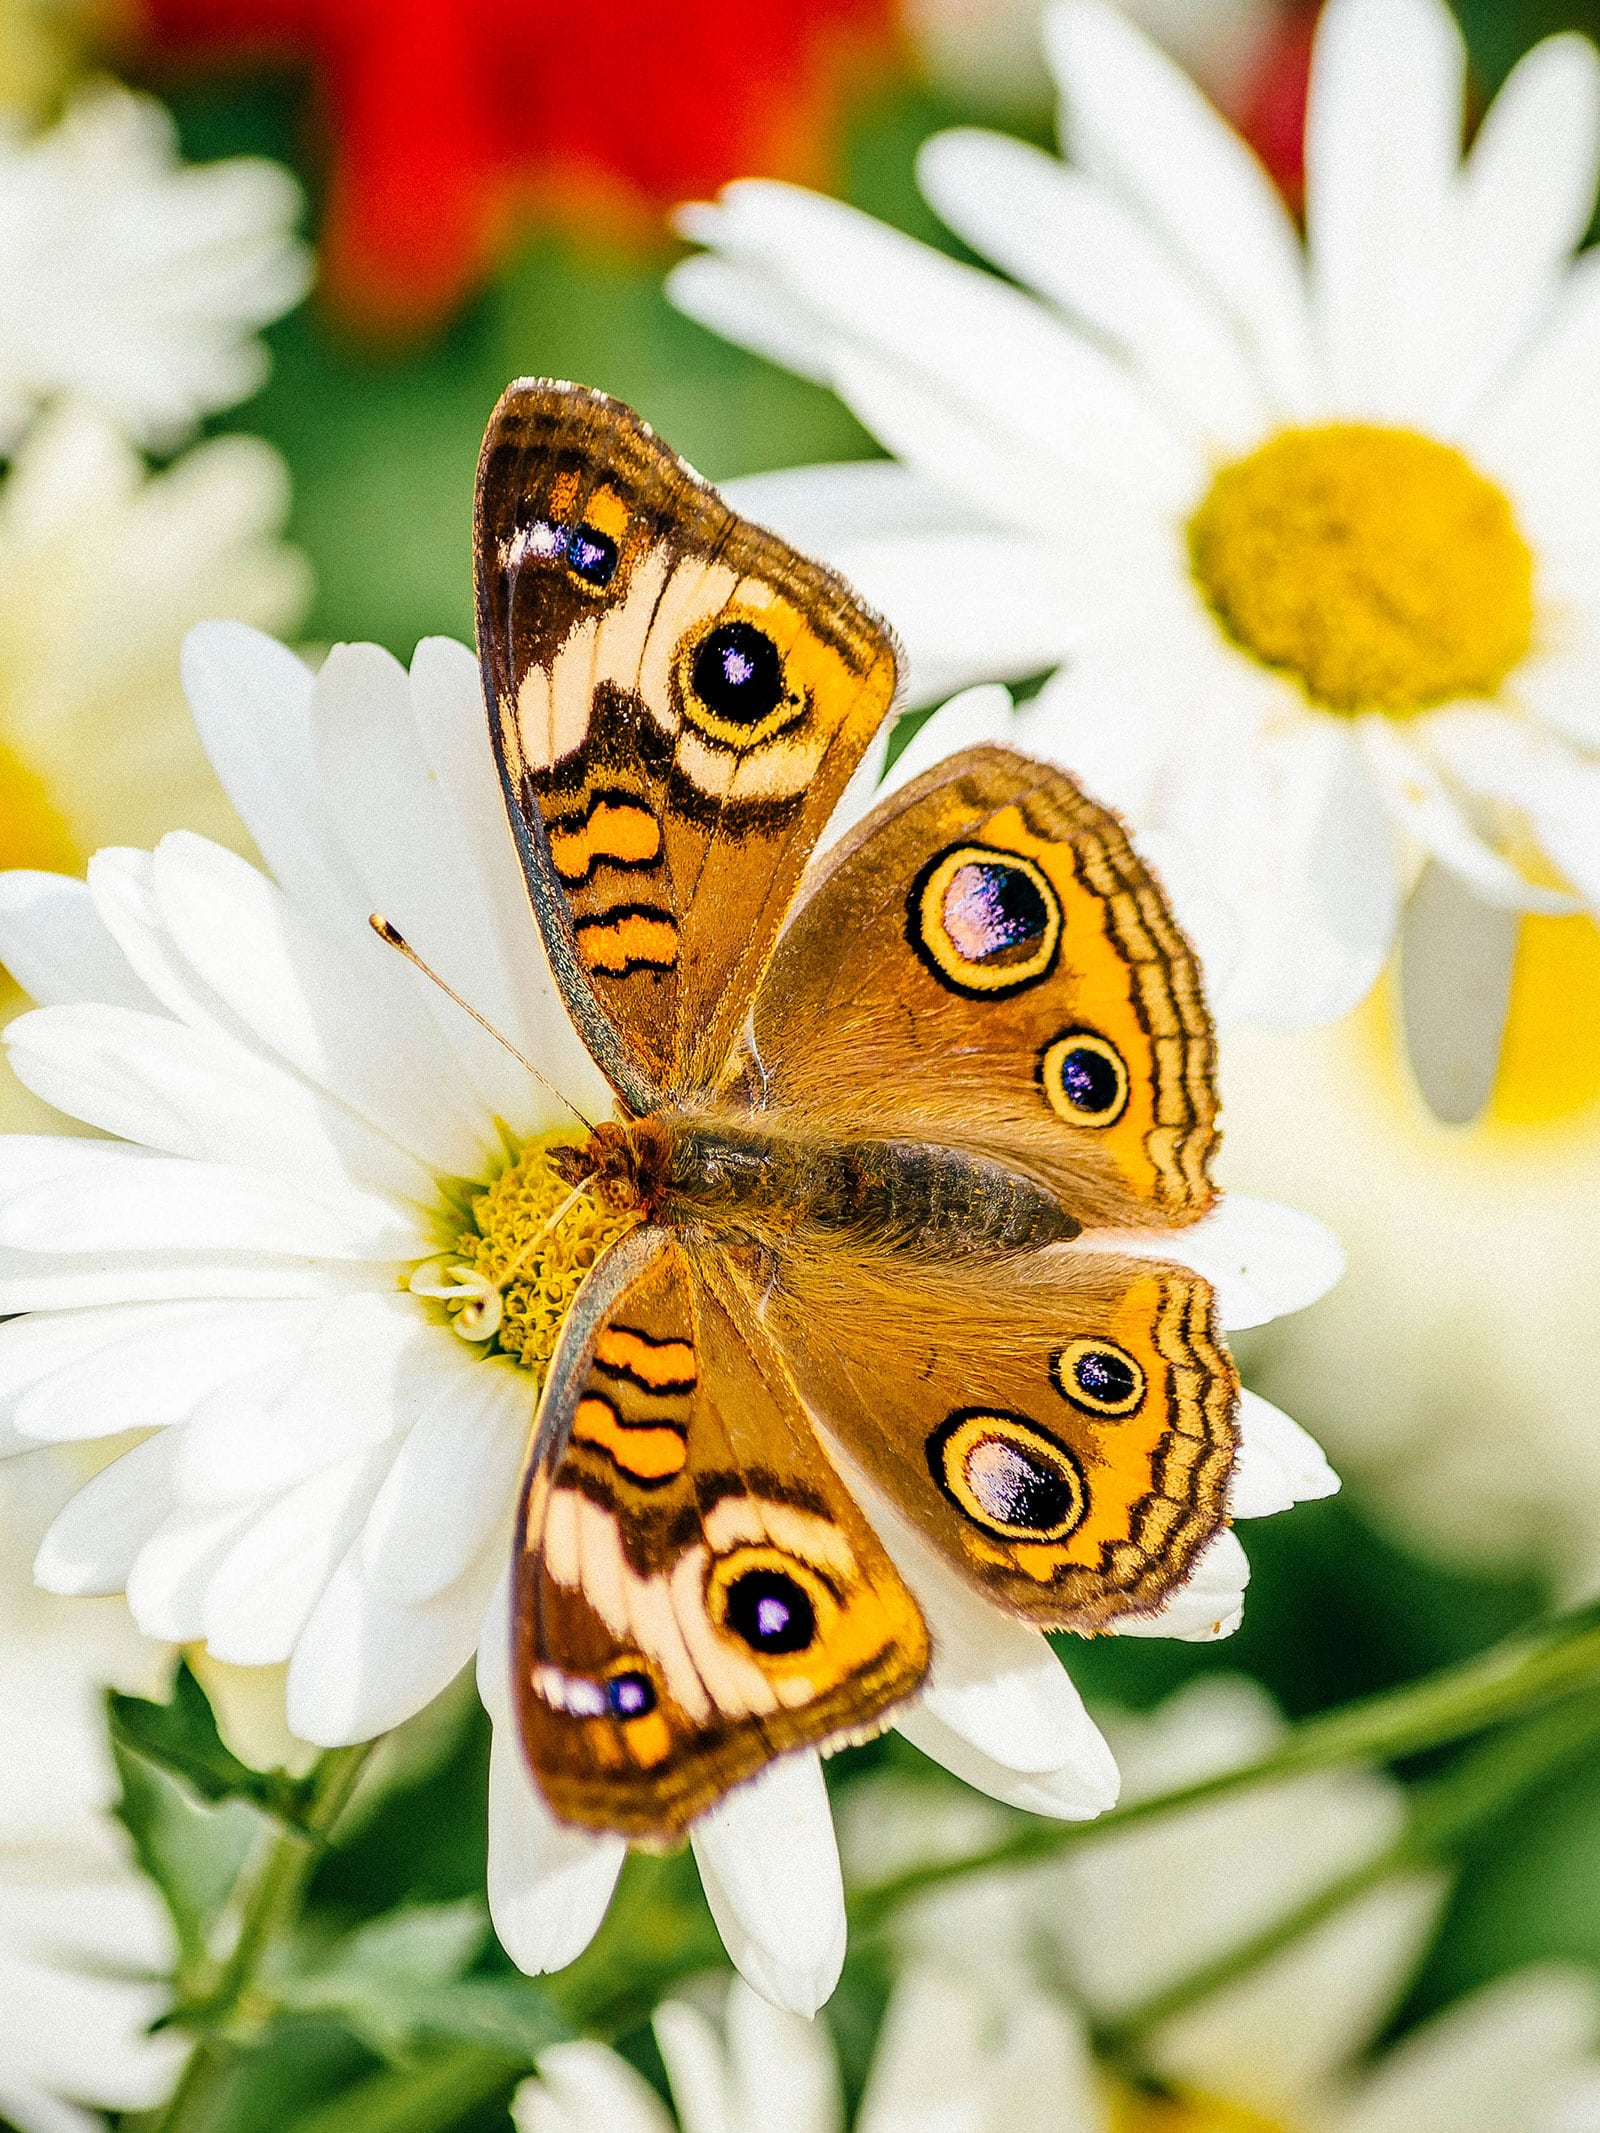 A visual guide to identifying butterflies in your garden